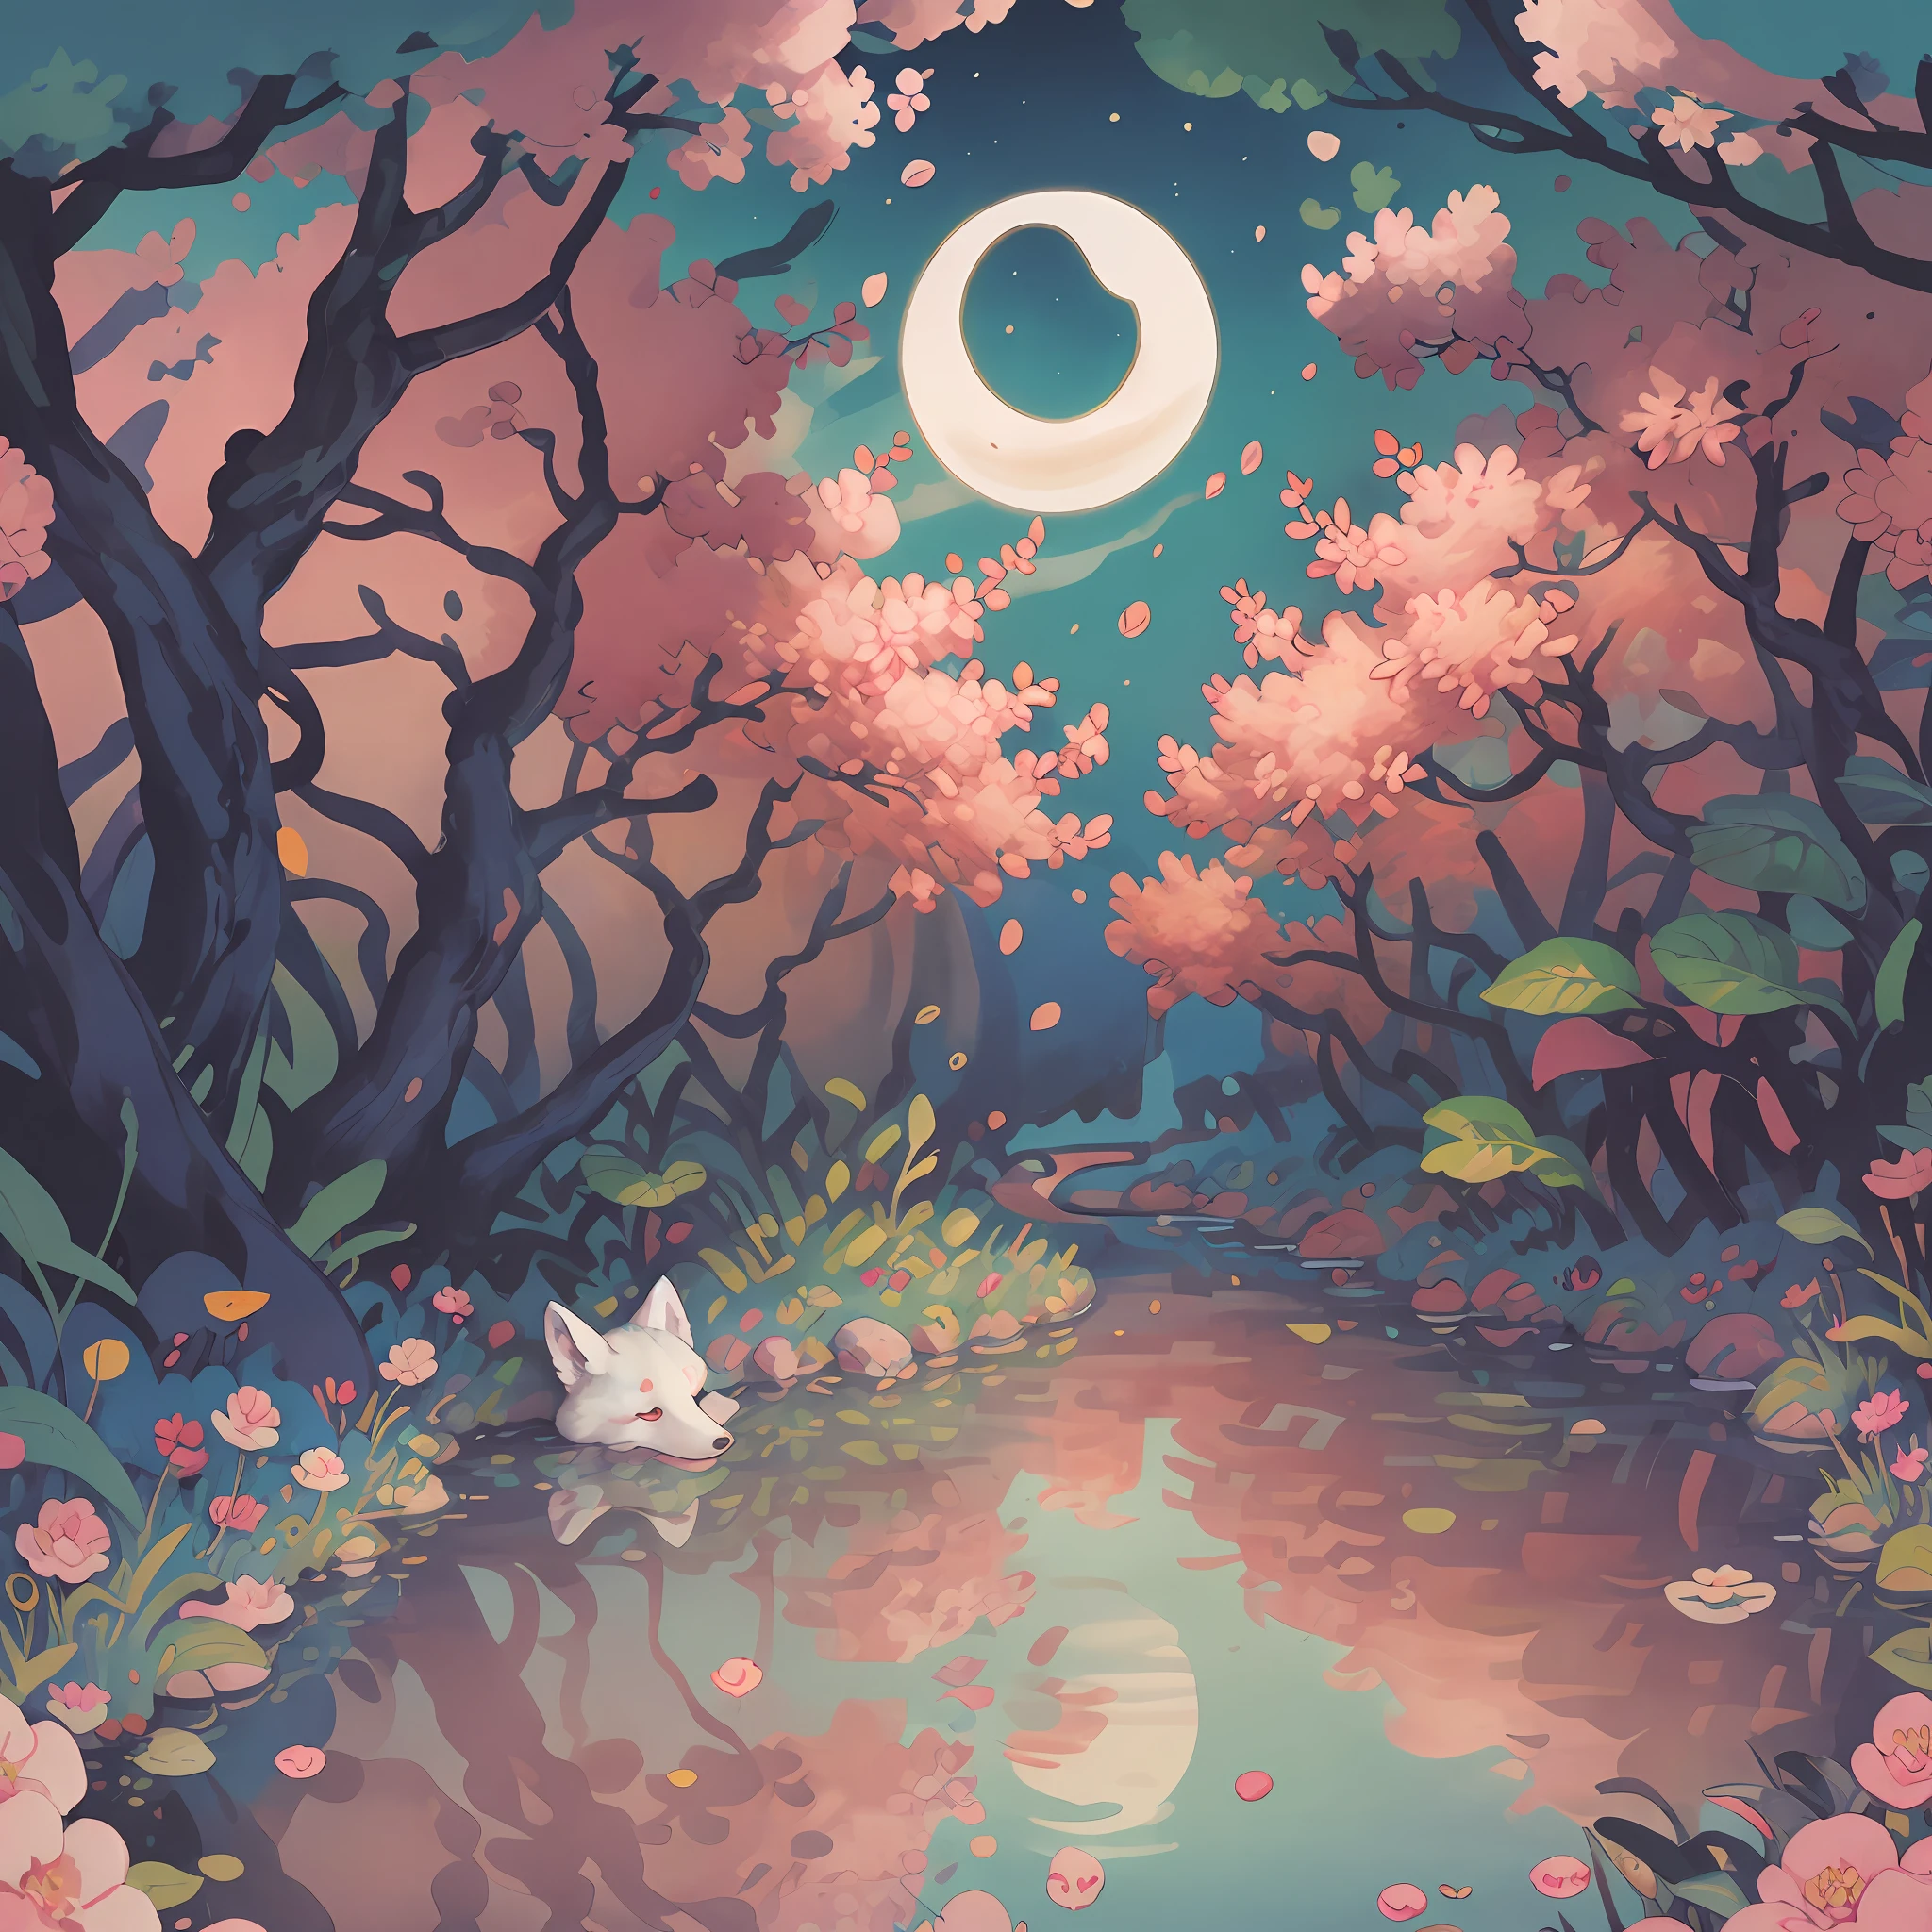 A white fox sleeps by a clear stream in the peach forest，The water reflects the starry sky and the moon